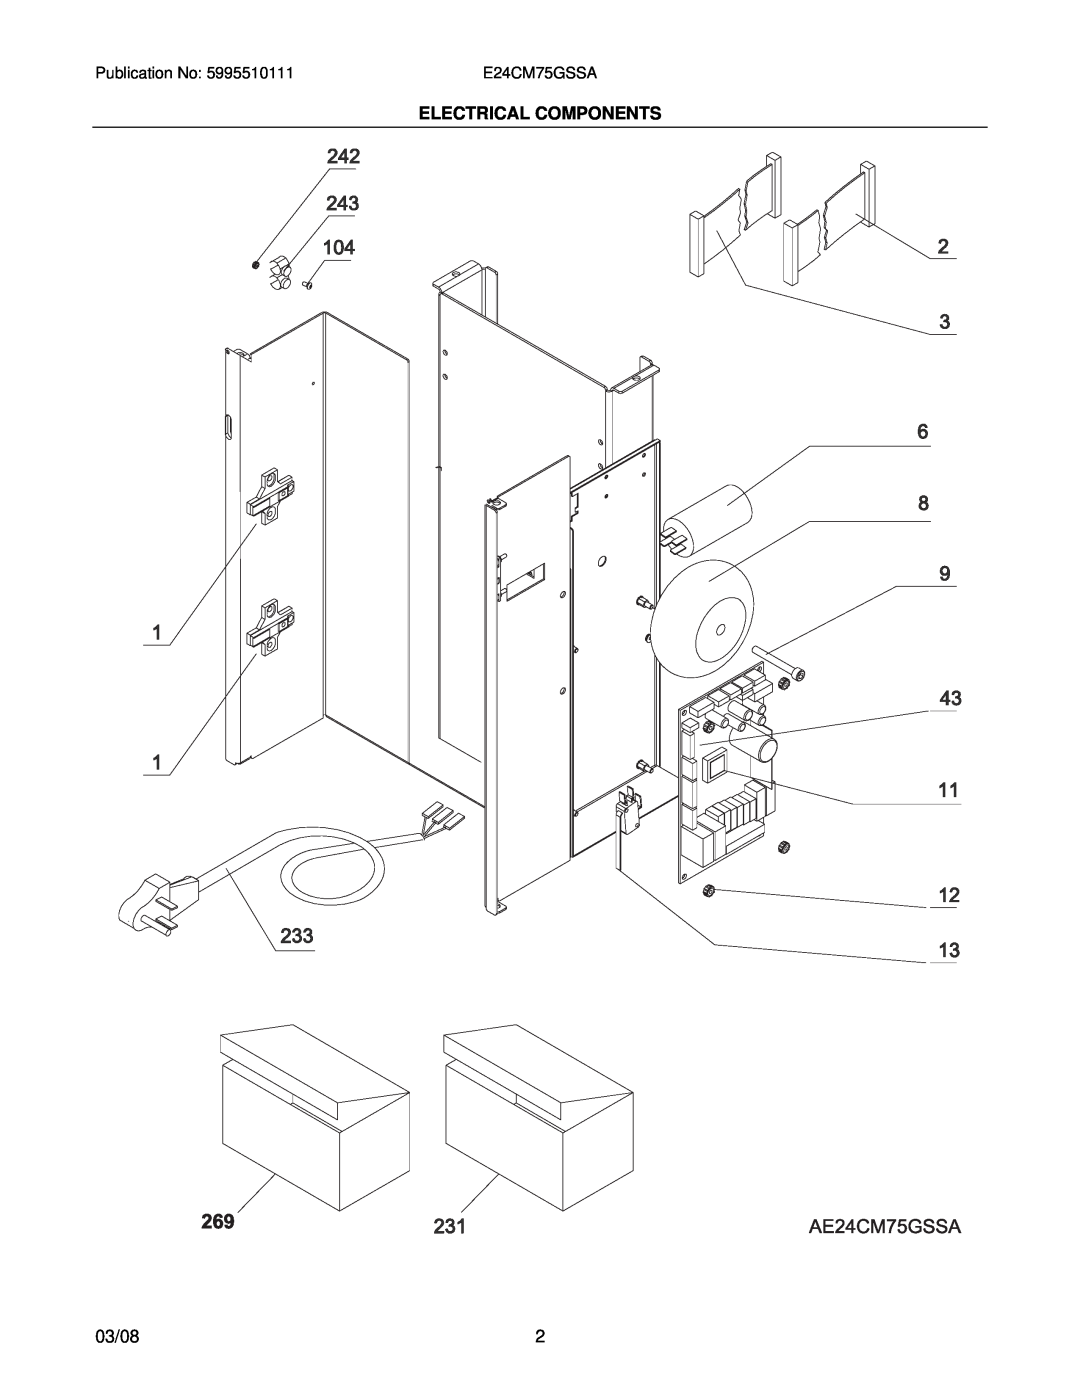 Electrolux E24CM75GSSA installation instructions Electrical Components, 03/08 